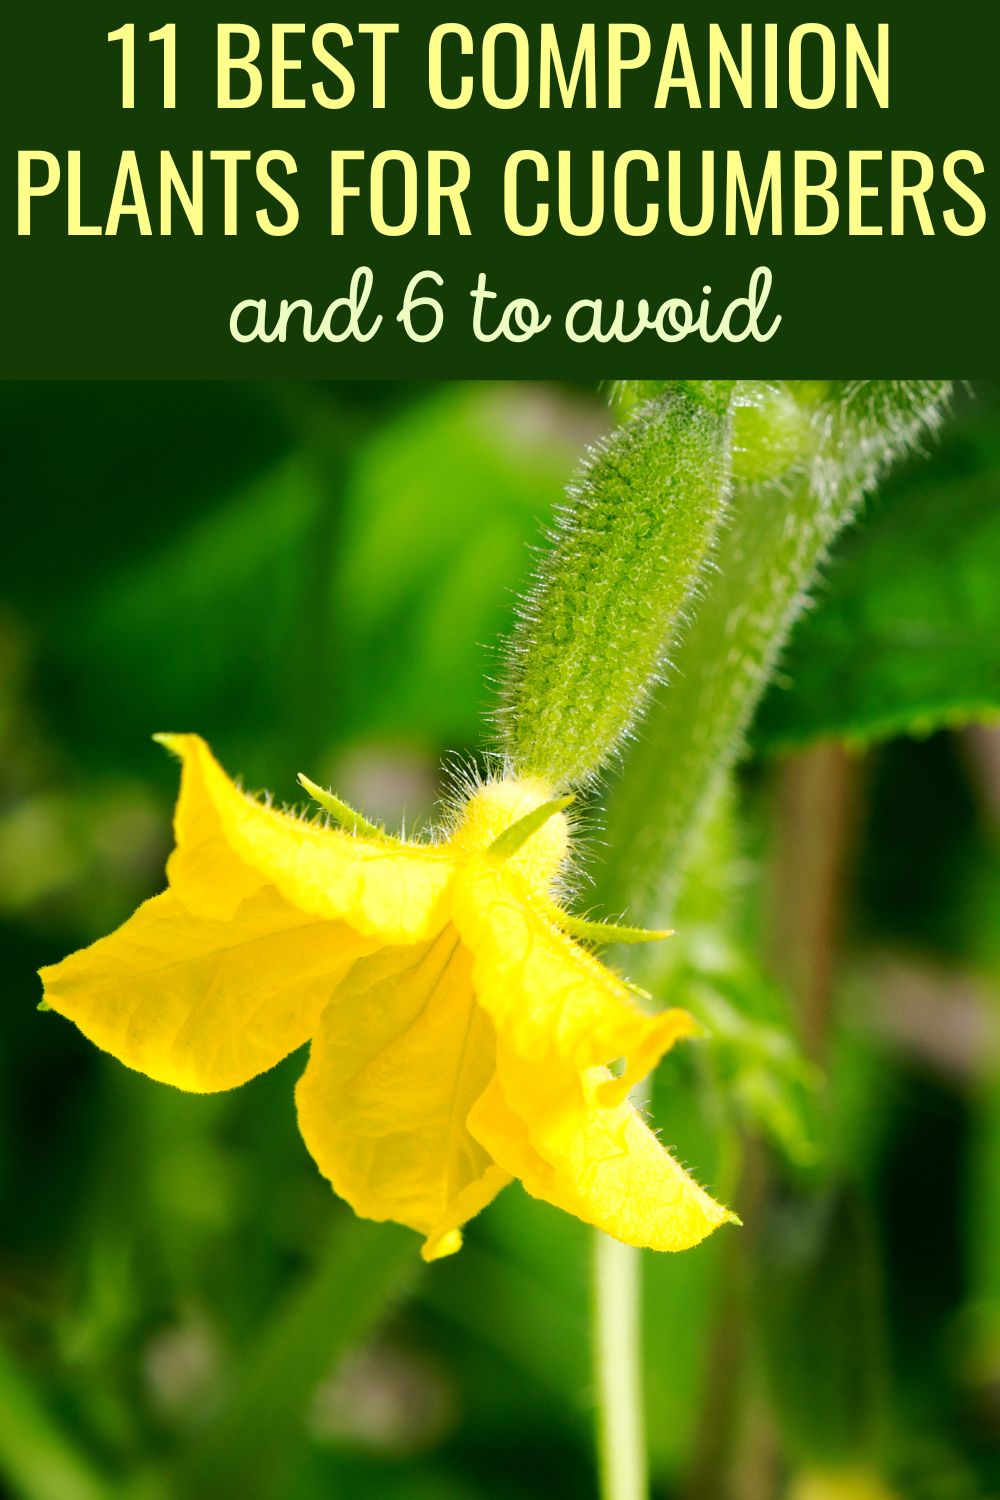 11 Best Companion Plants for Cucumbers - And 6 to Avoid